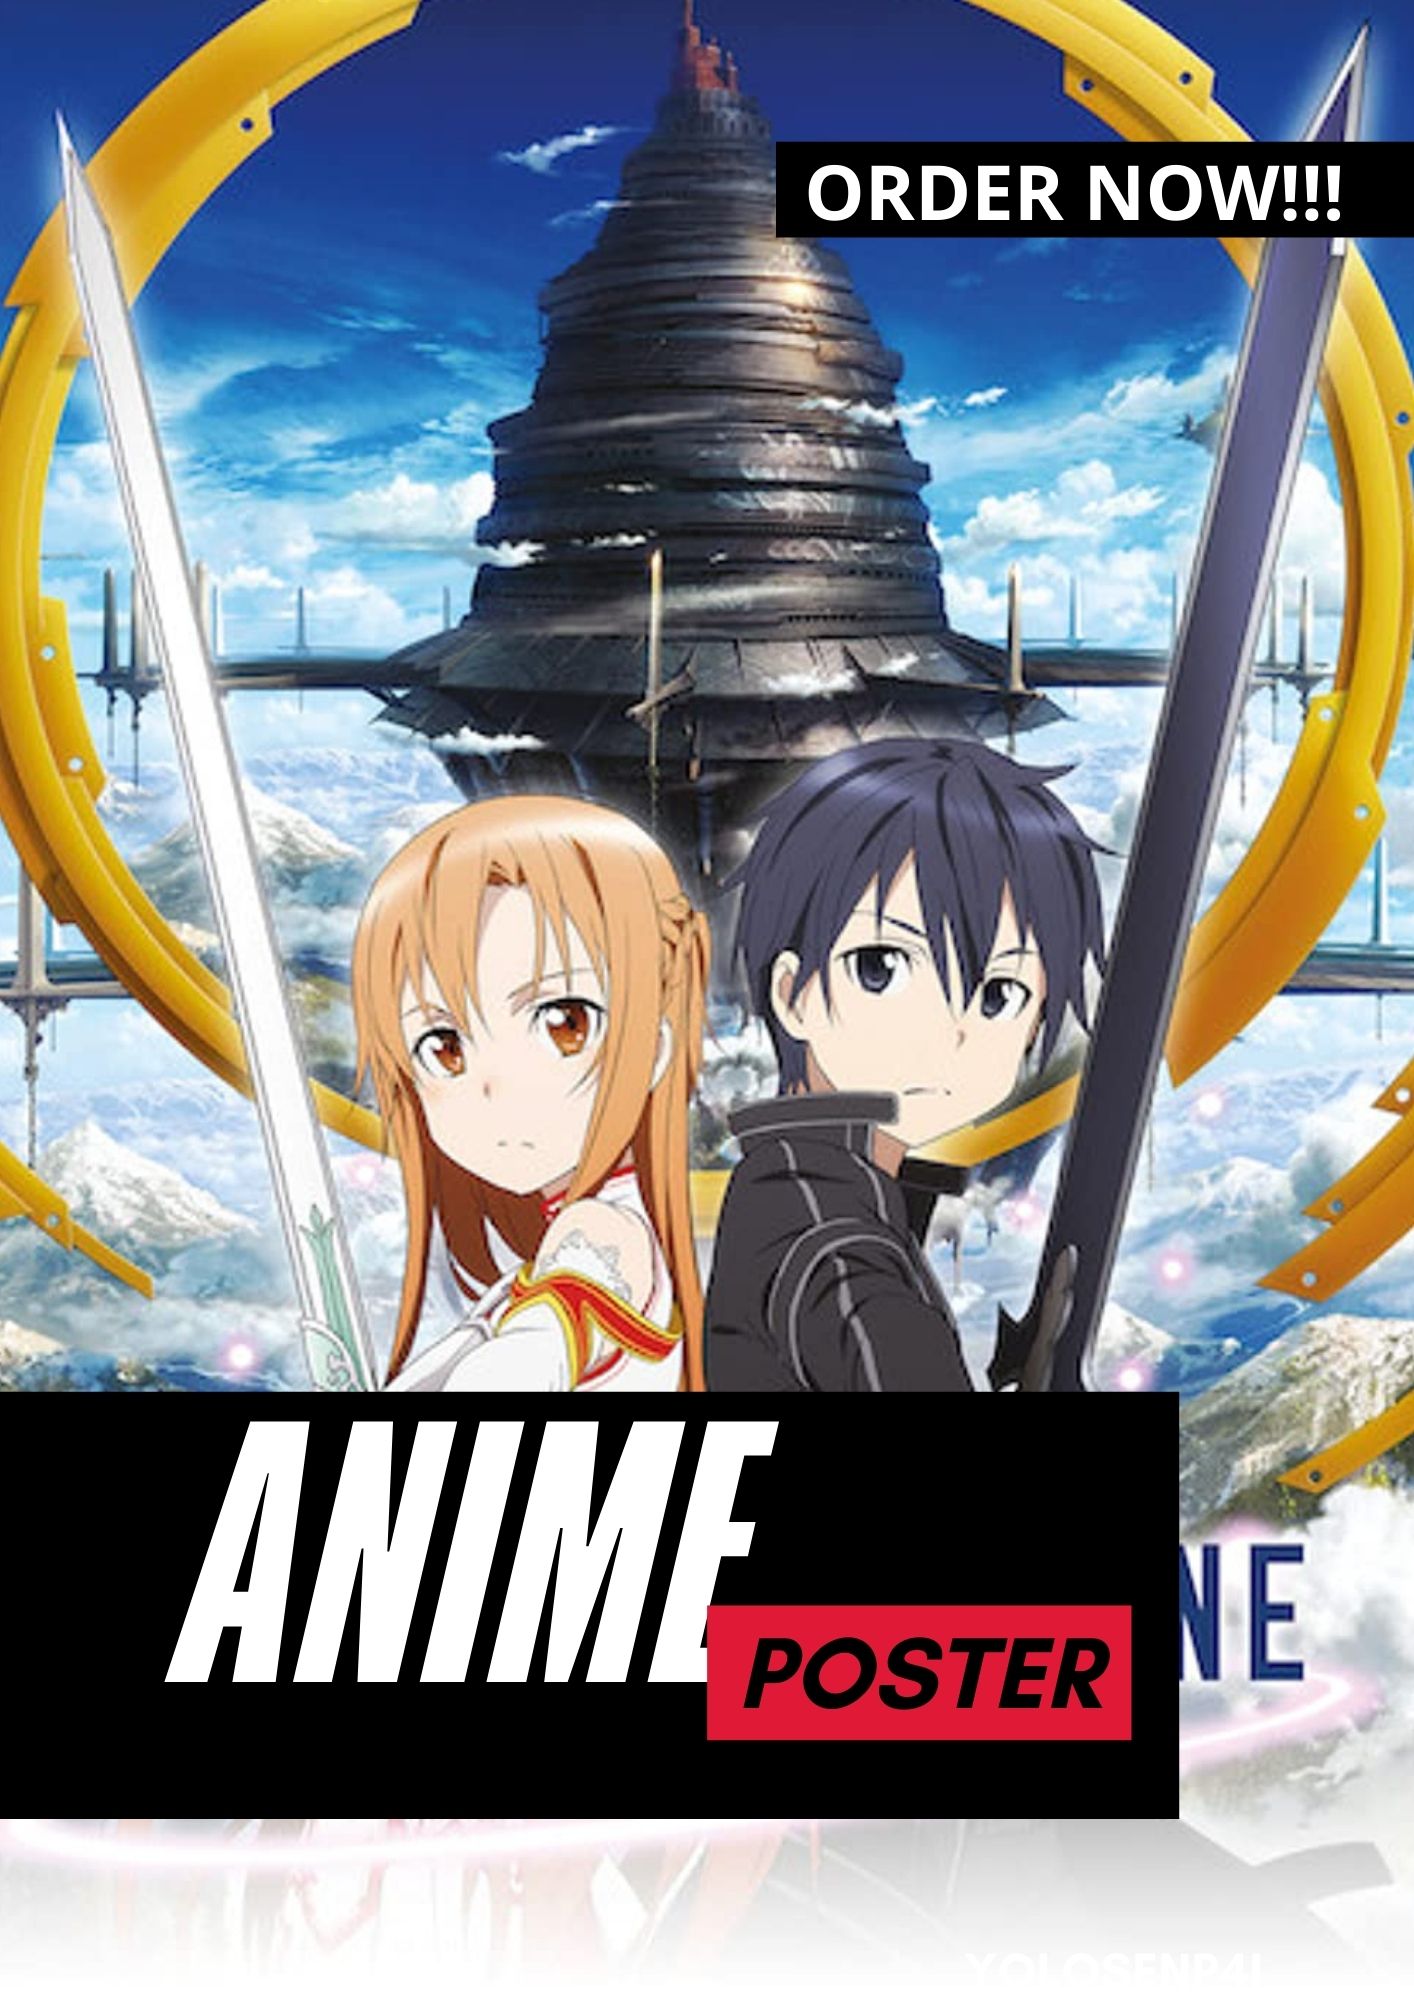 Anime Sword Art Online SAO Jasna Tung Wall Poster Scroll Home Decor Fan's Gift